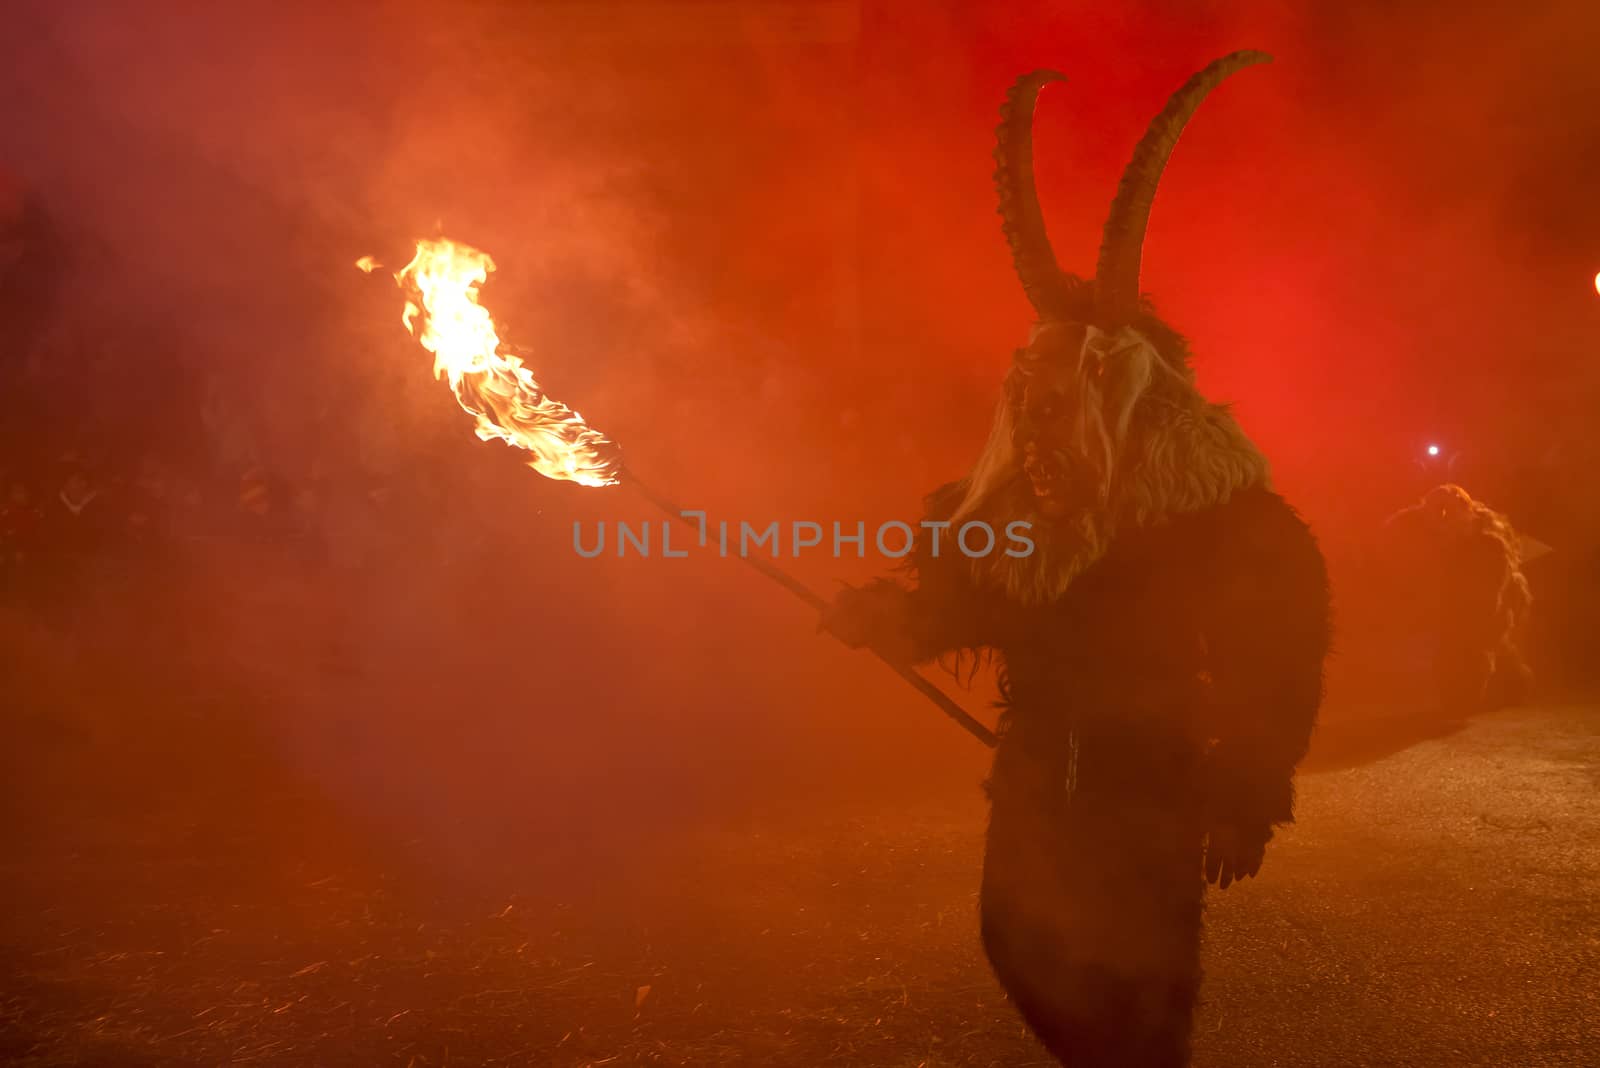 The traditional Krampus masks show in Tarvisio, North East Alps in Italy